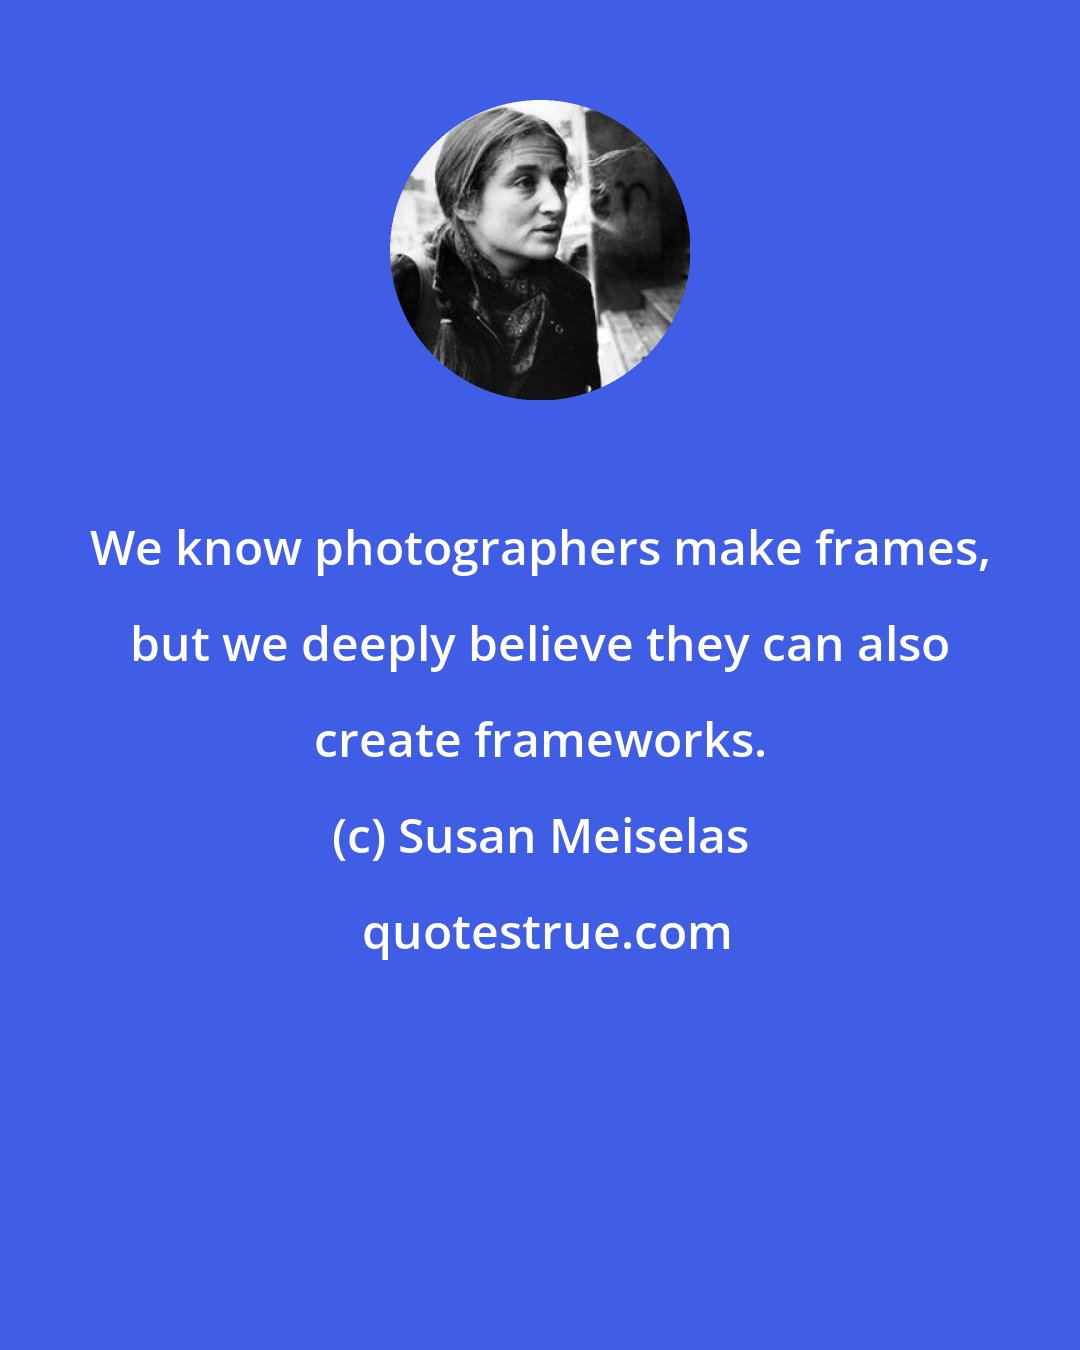 Susan Meiselas: We know photographers make frames, but we deeply believe they can also create frameworks.